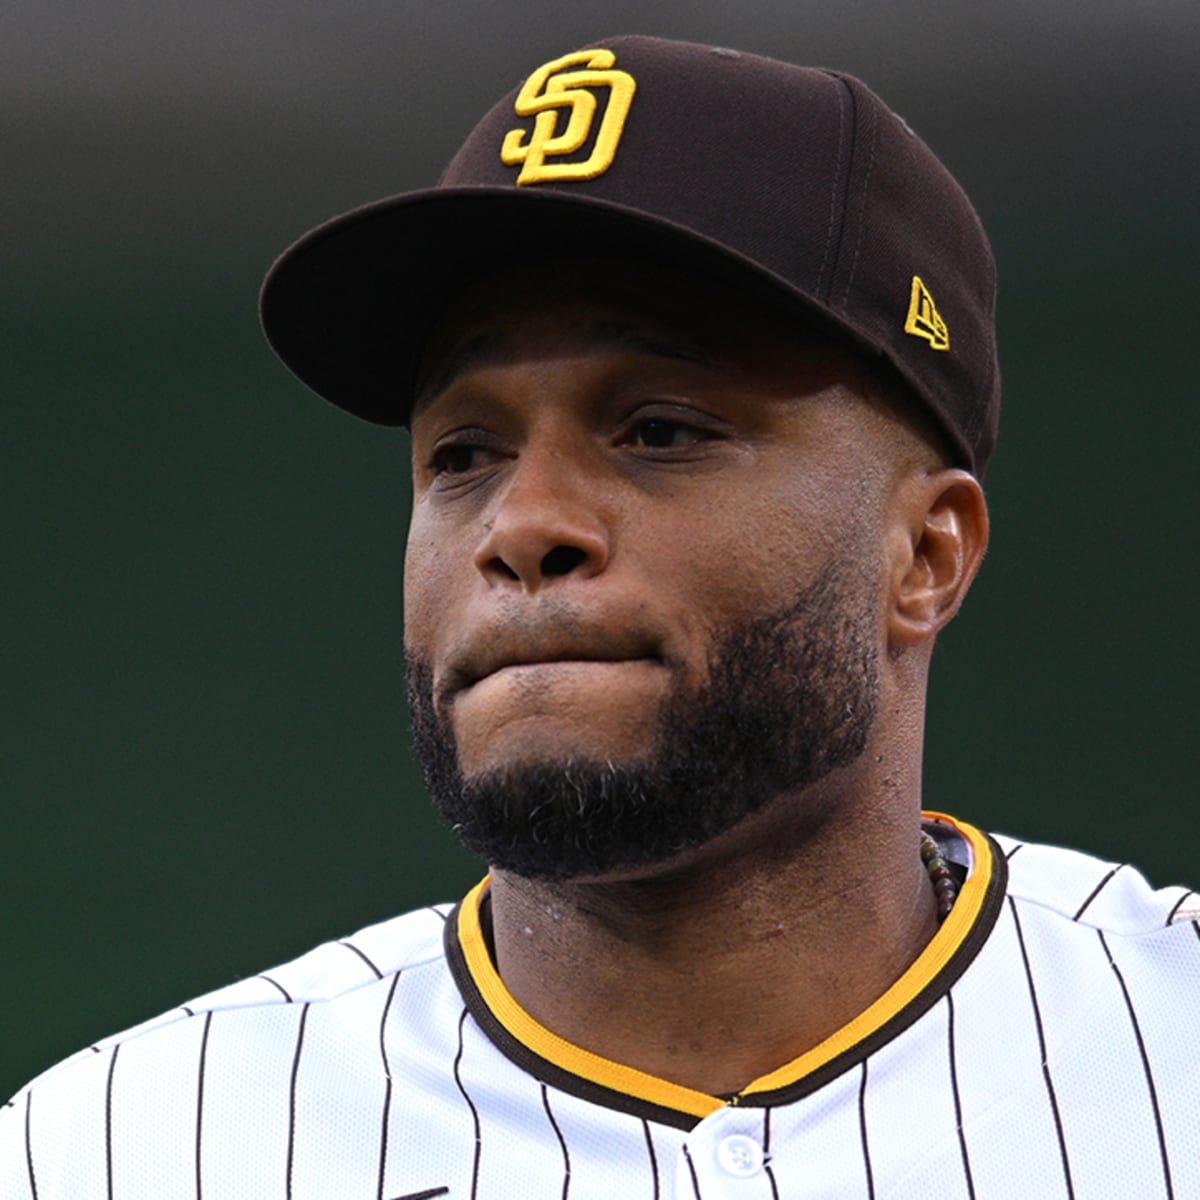 Ex-Yankees, Mets star Robinson Cano struggles in Padres debut 